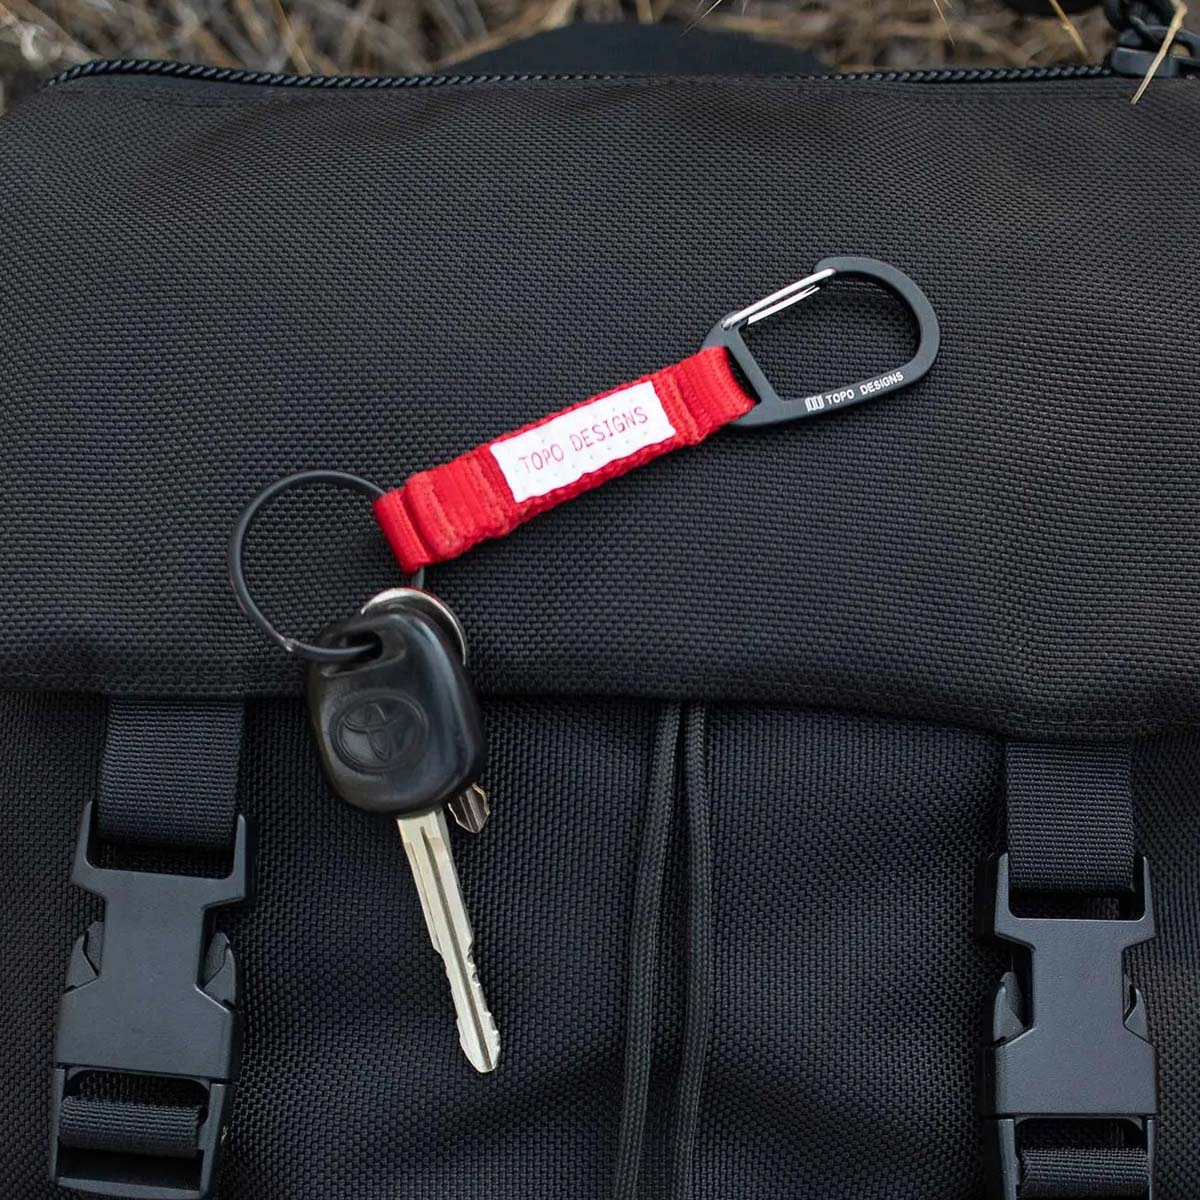 Topo Designs Key Clip, keep keys handy and visible with the Key Clip